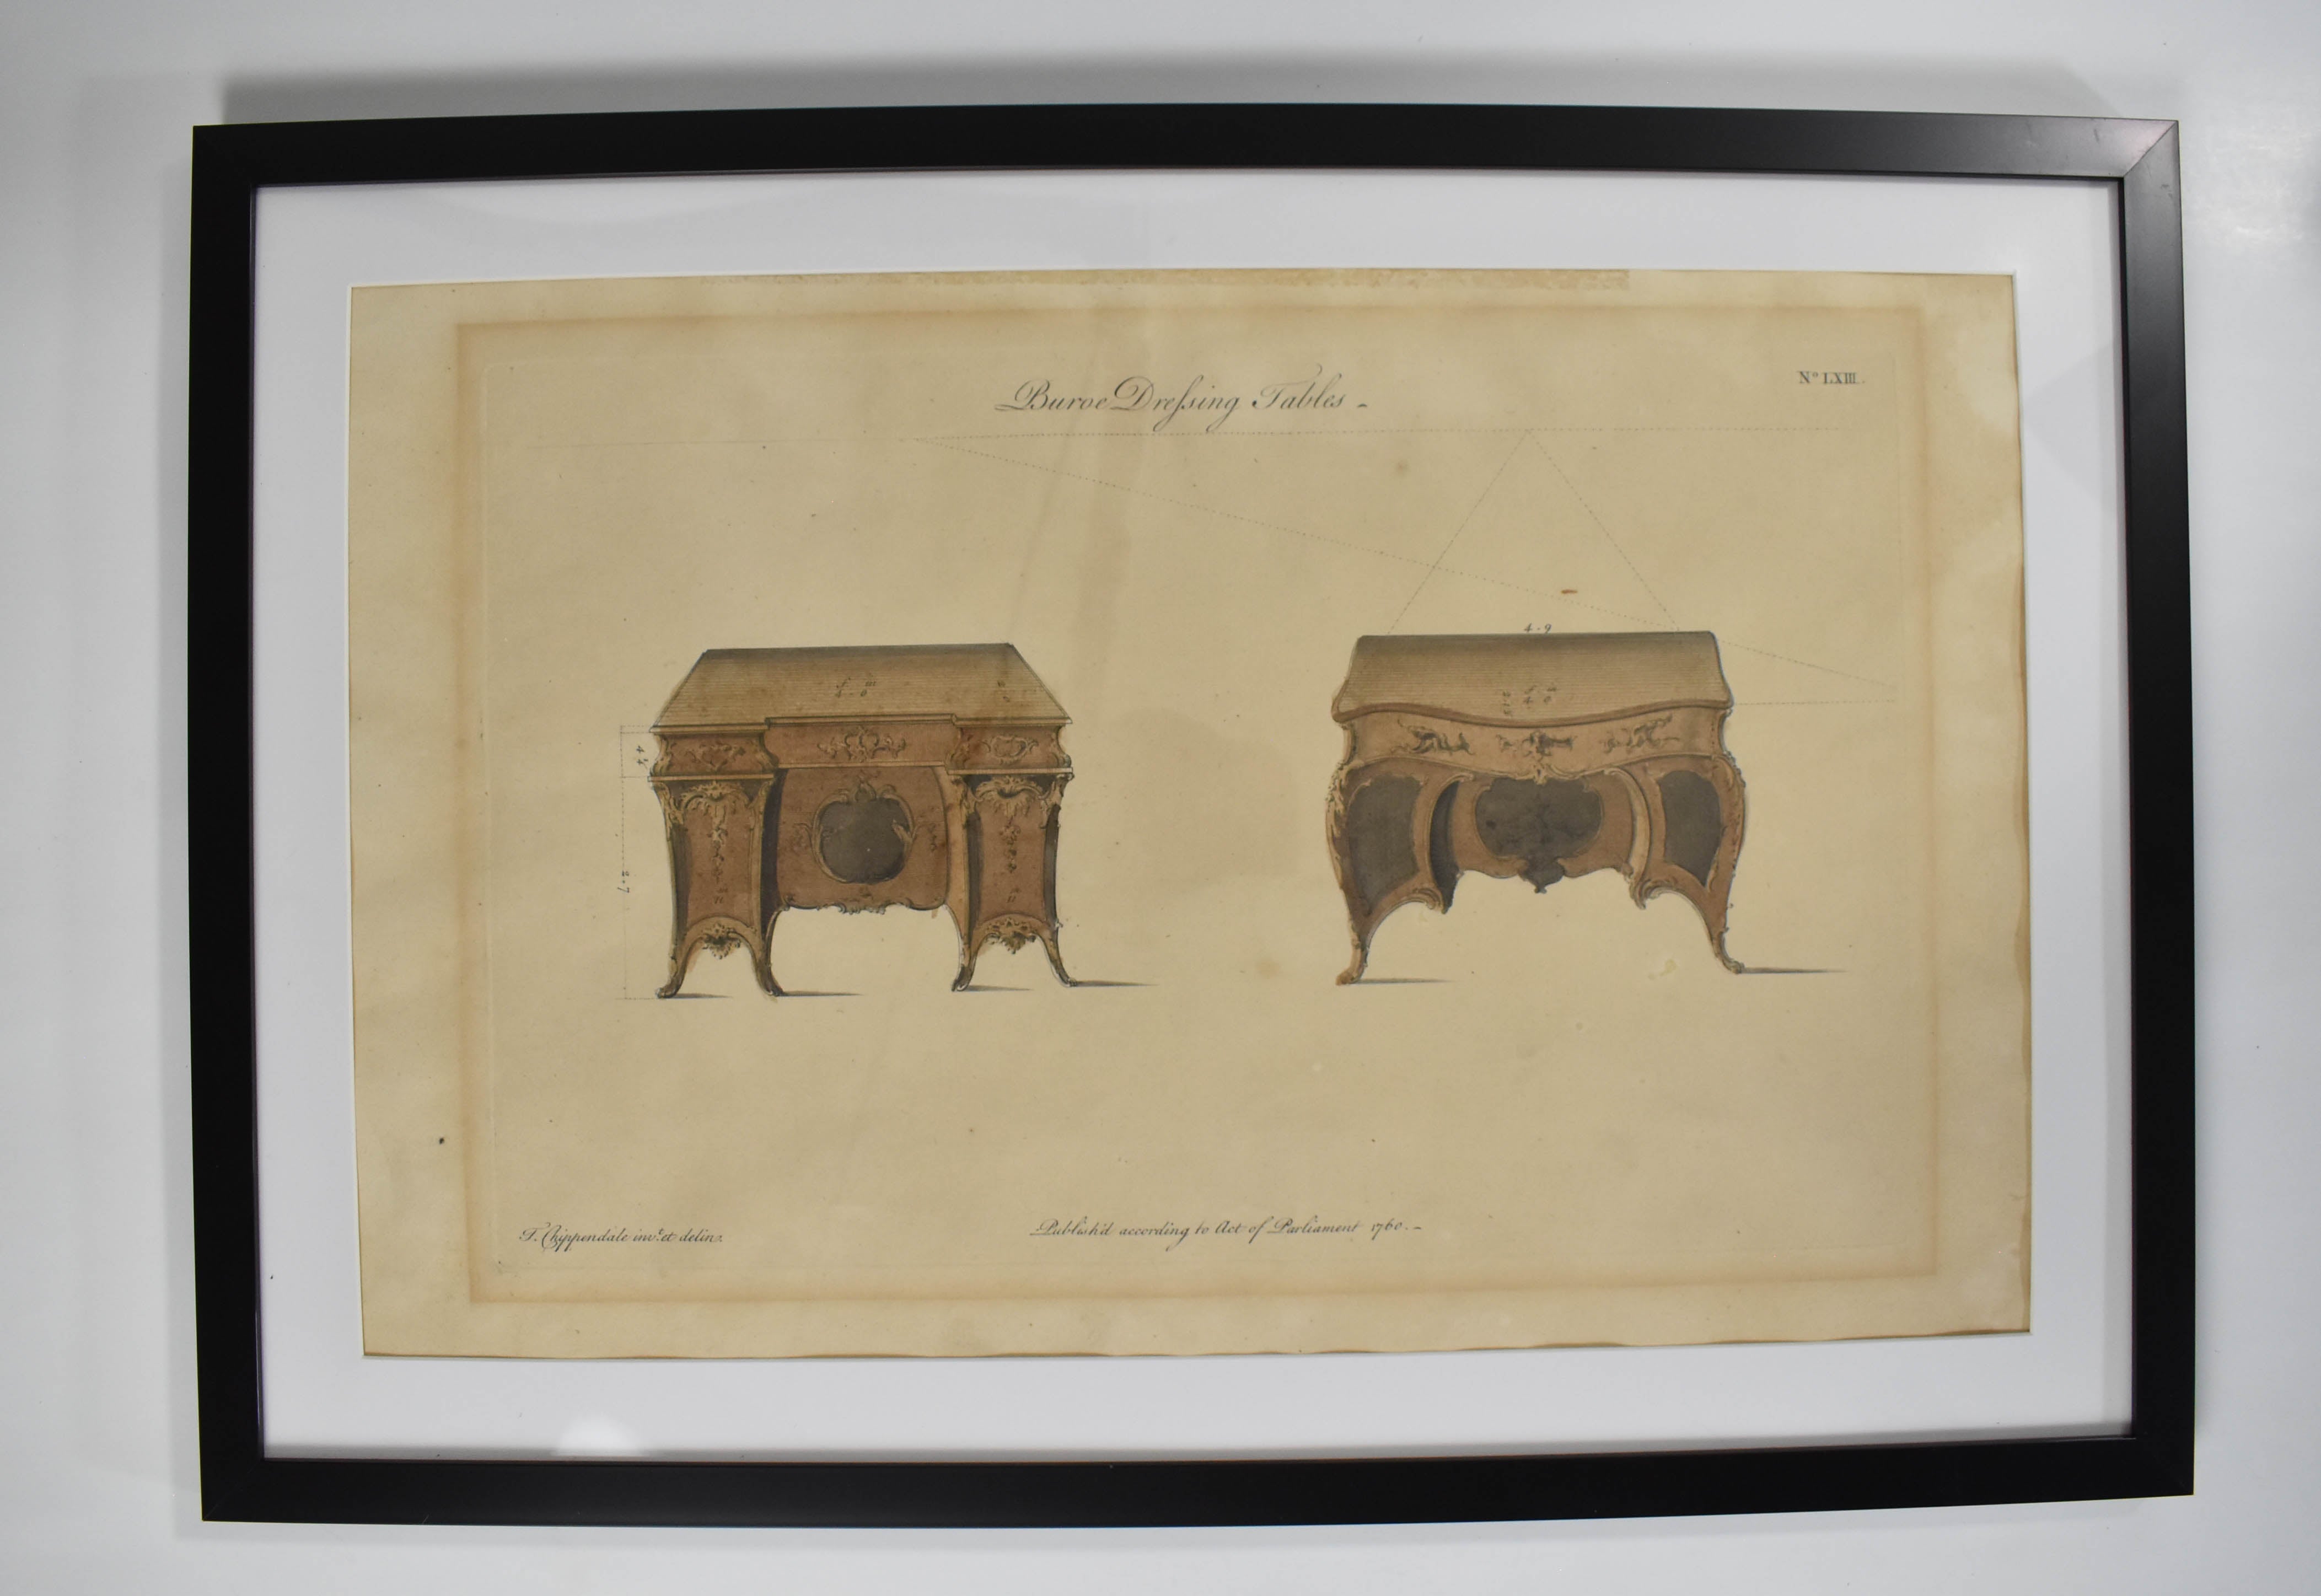 A Buroe Dressing Table Thomas Chippendale 1760 Engraving Template LXIII